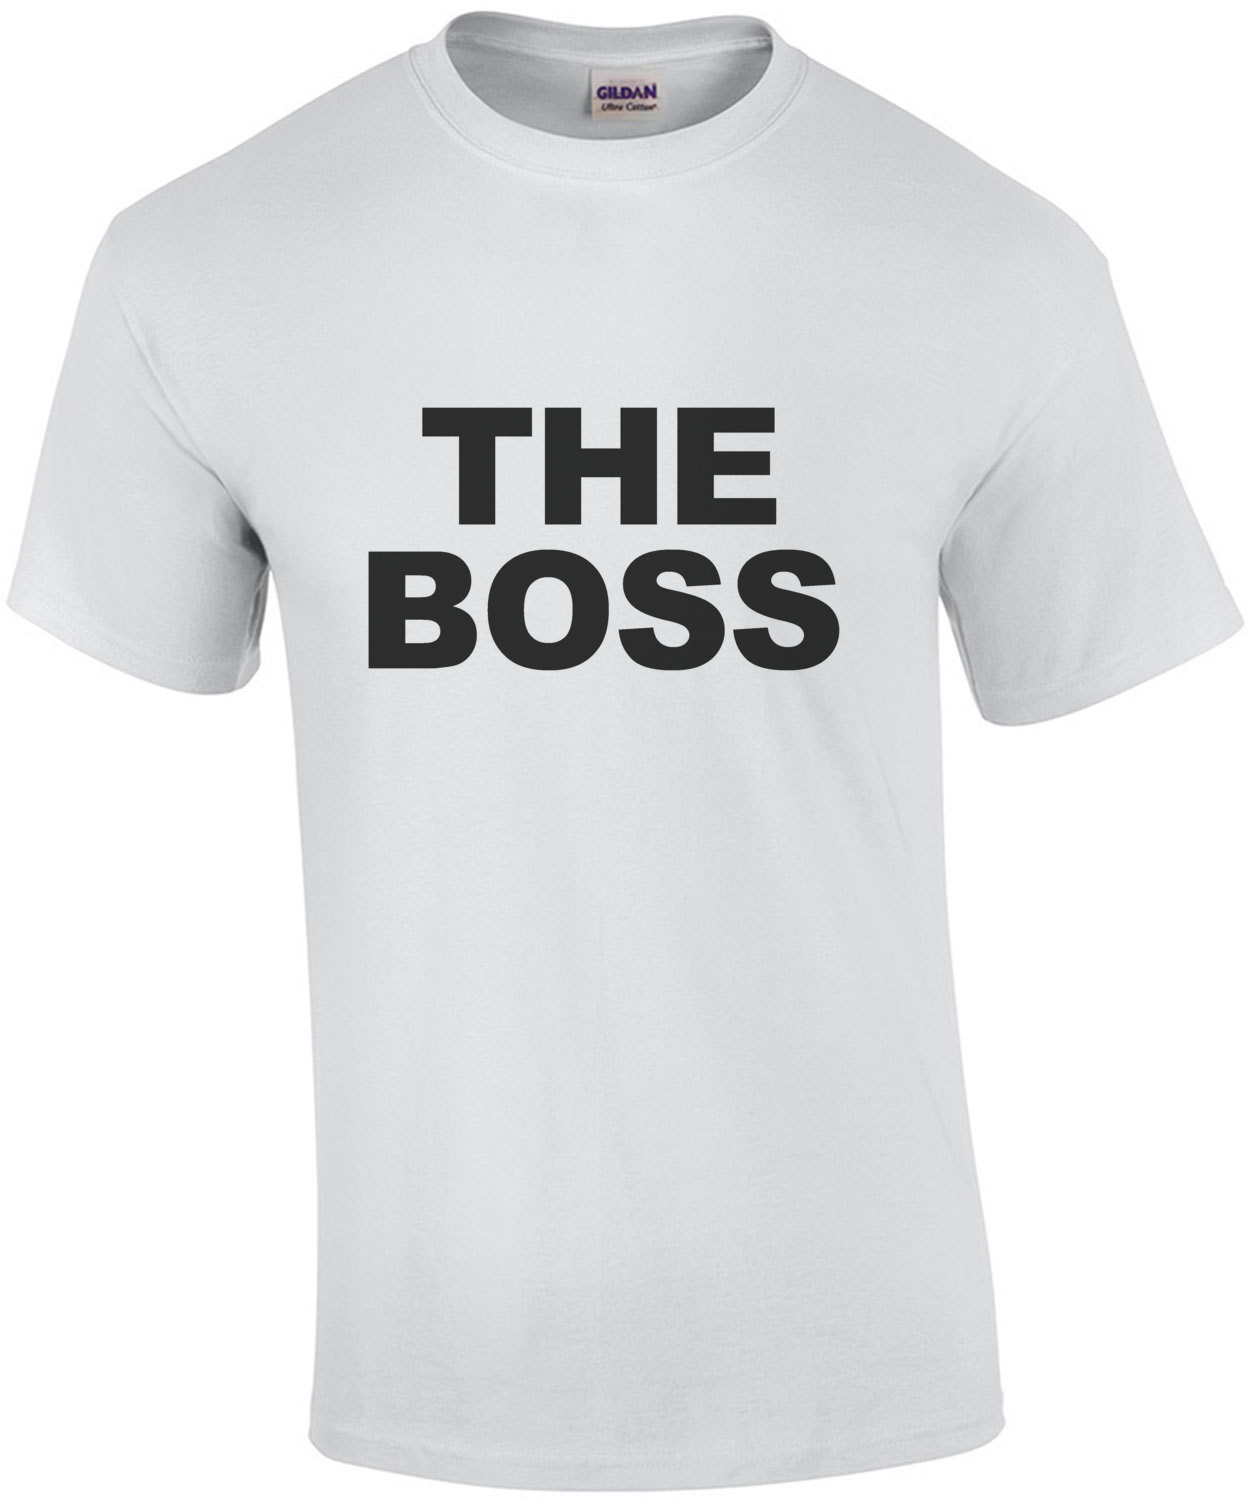 The Boss - Funny couple's t-shirt